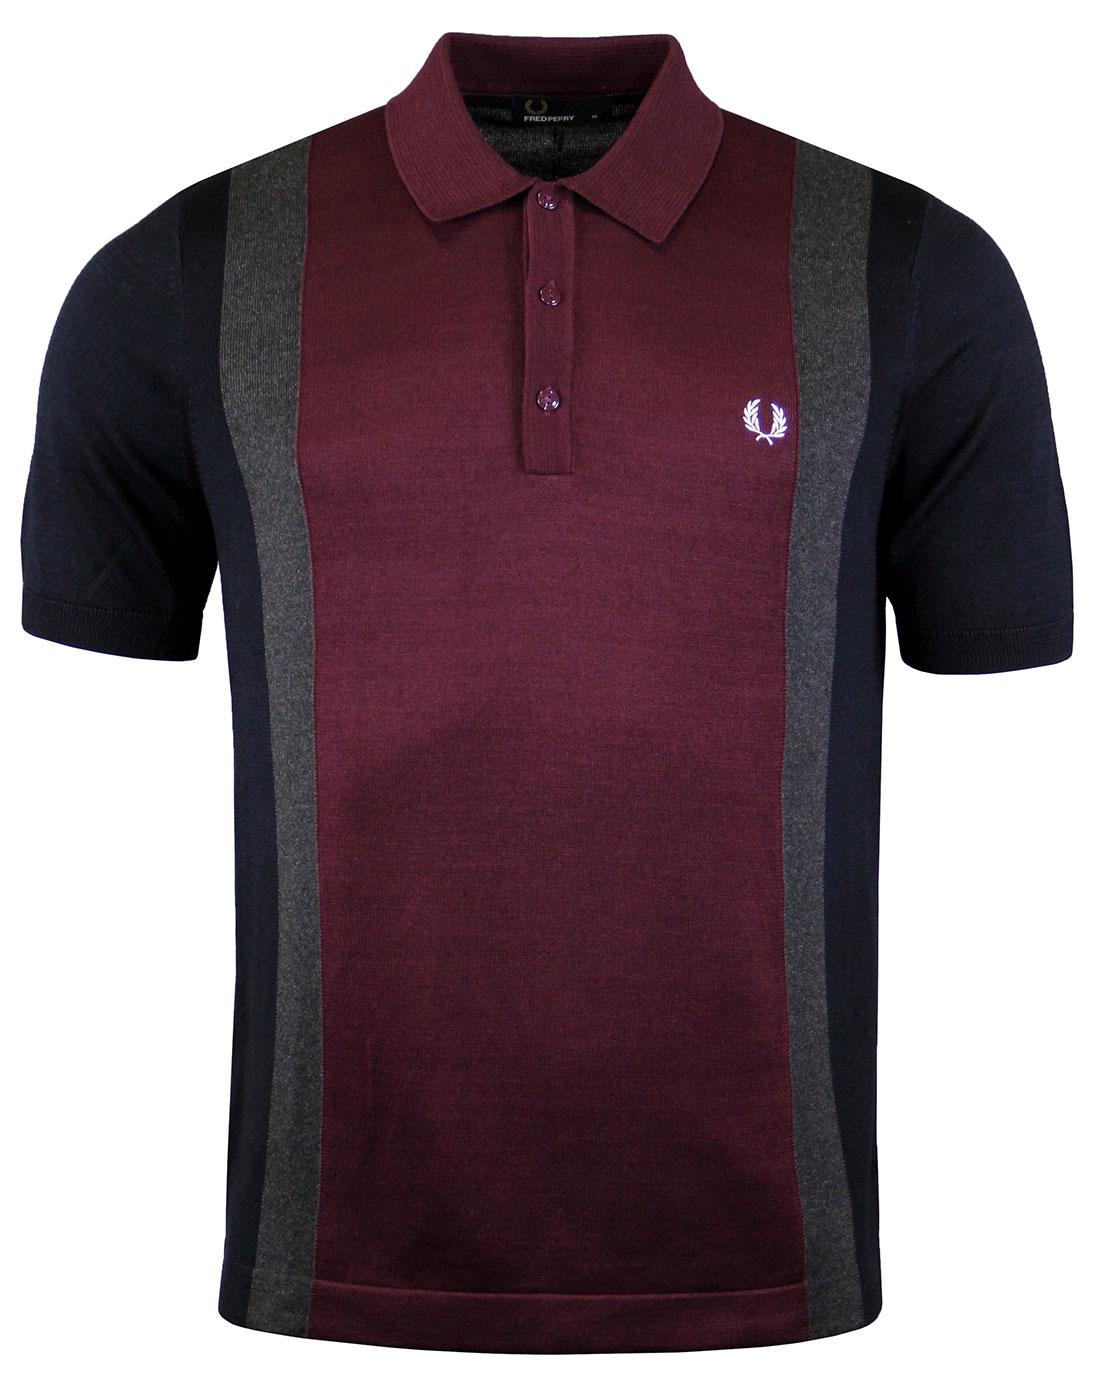 FRED PERRY Men's Striped Panel Knitted Polo - Navy